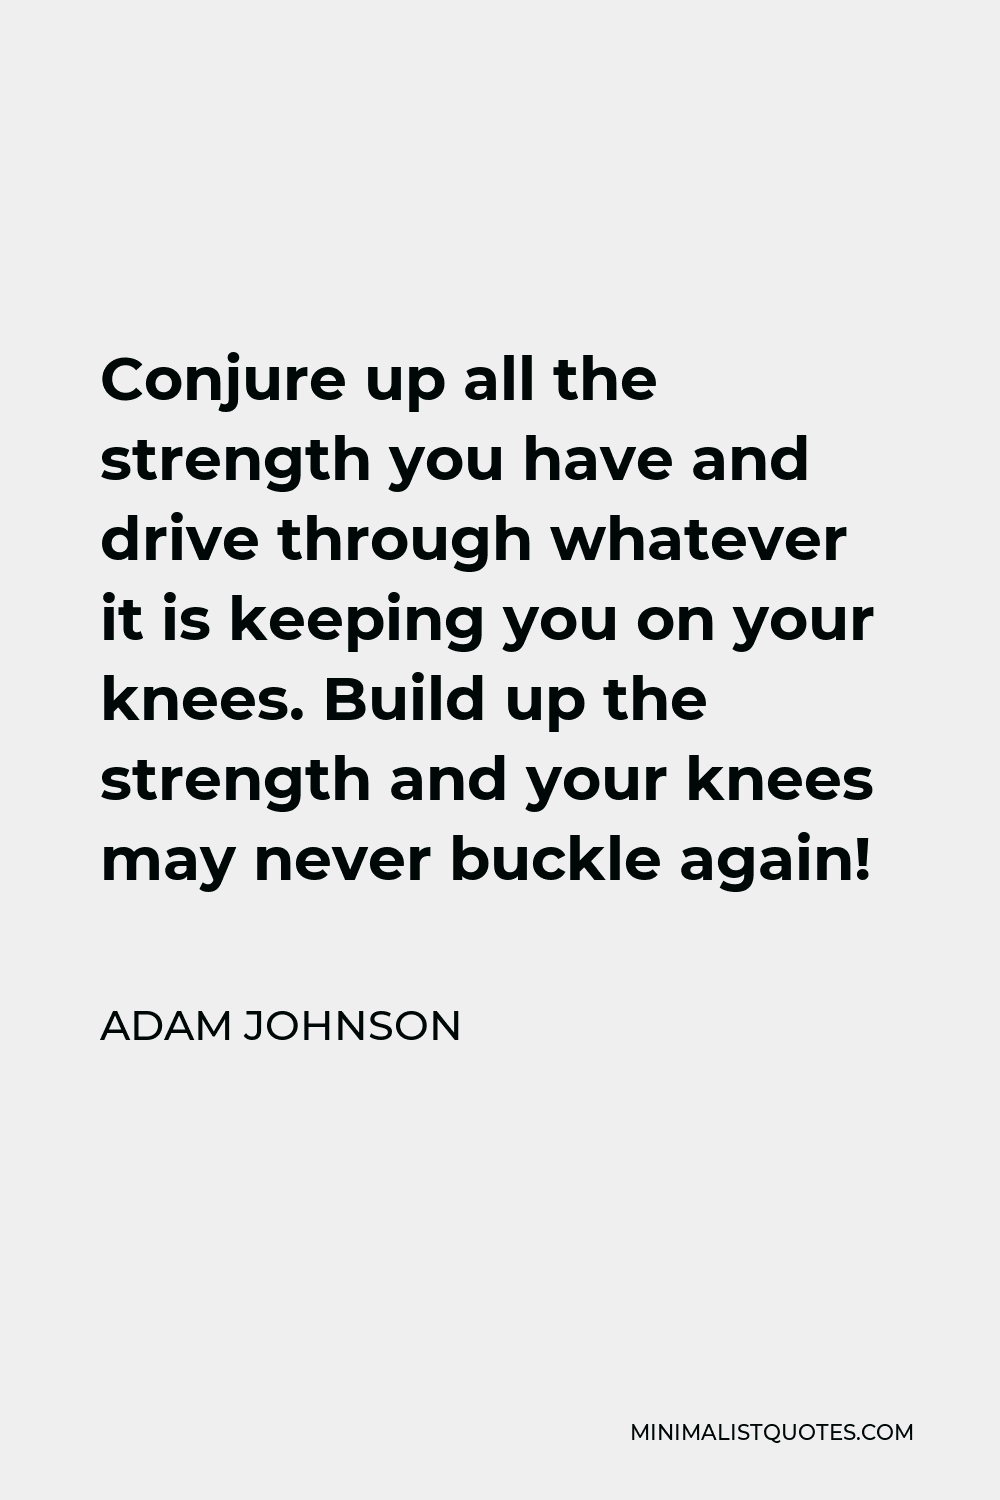 Adam Johnson Quote - Conjure up all the strength you have and drive through whatever it is keeping you on your knees. Build up the strength and your knees may never buckle again!